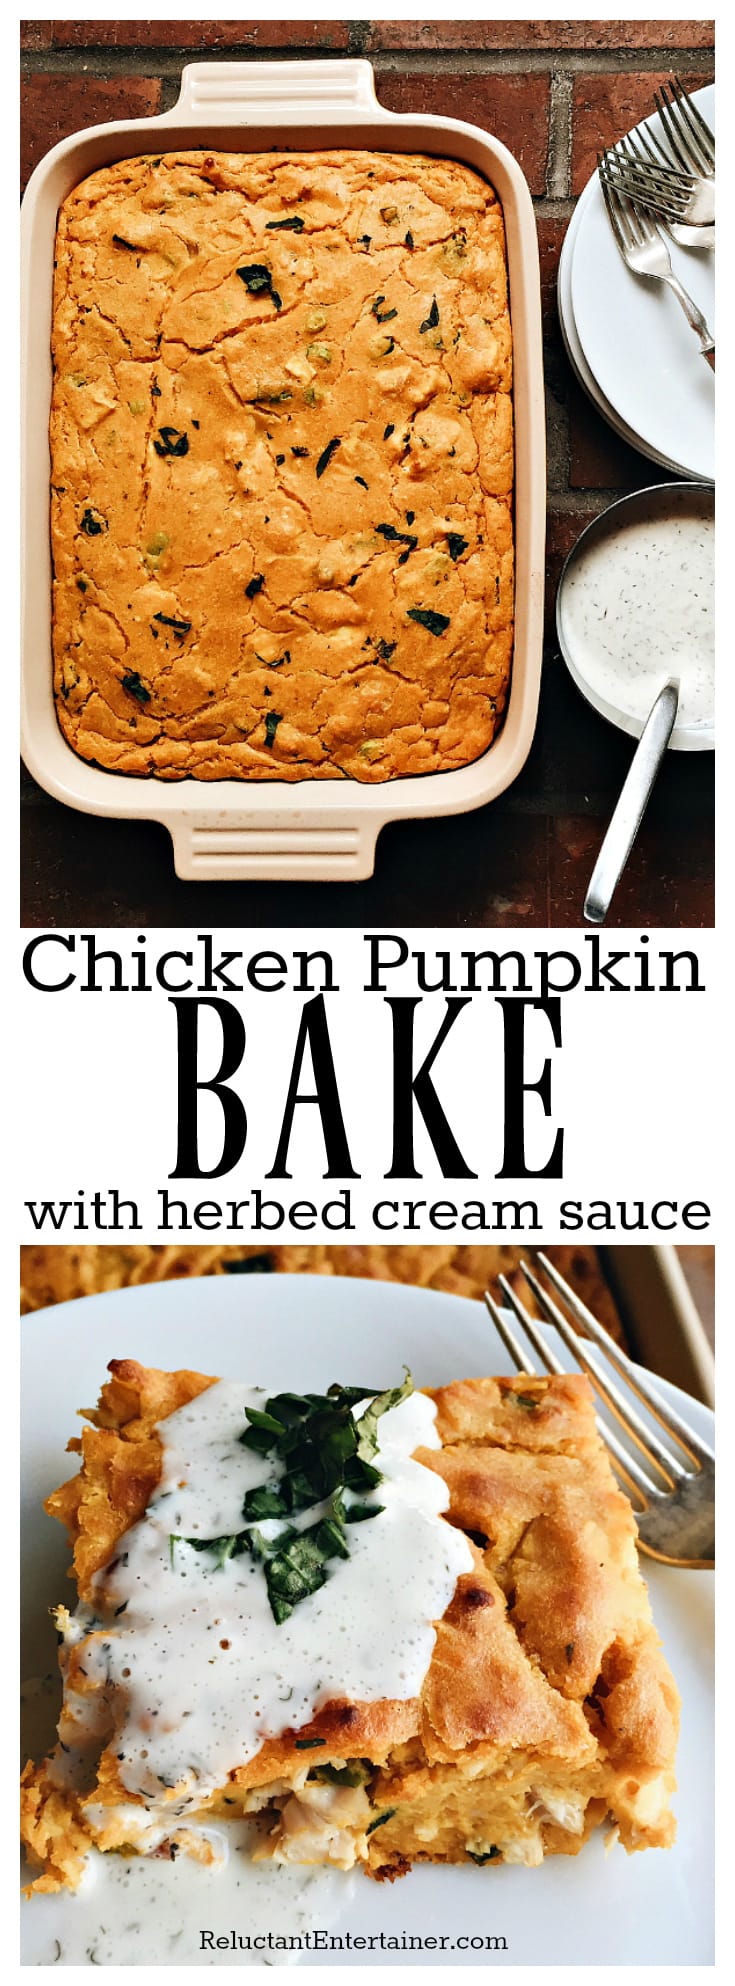 Chicken Pumpkin Bake with Herbed Cream Sauce is the ultimate fall dish to make ahead, and bake right before company comes to dinner